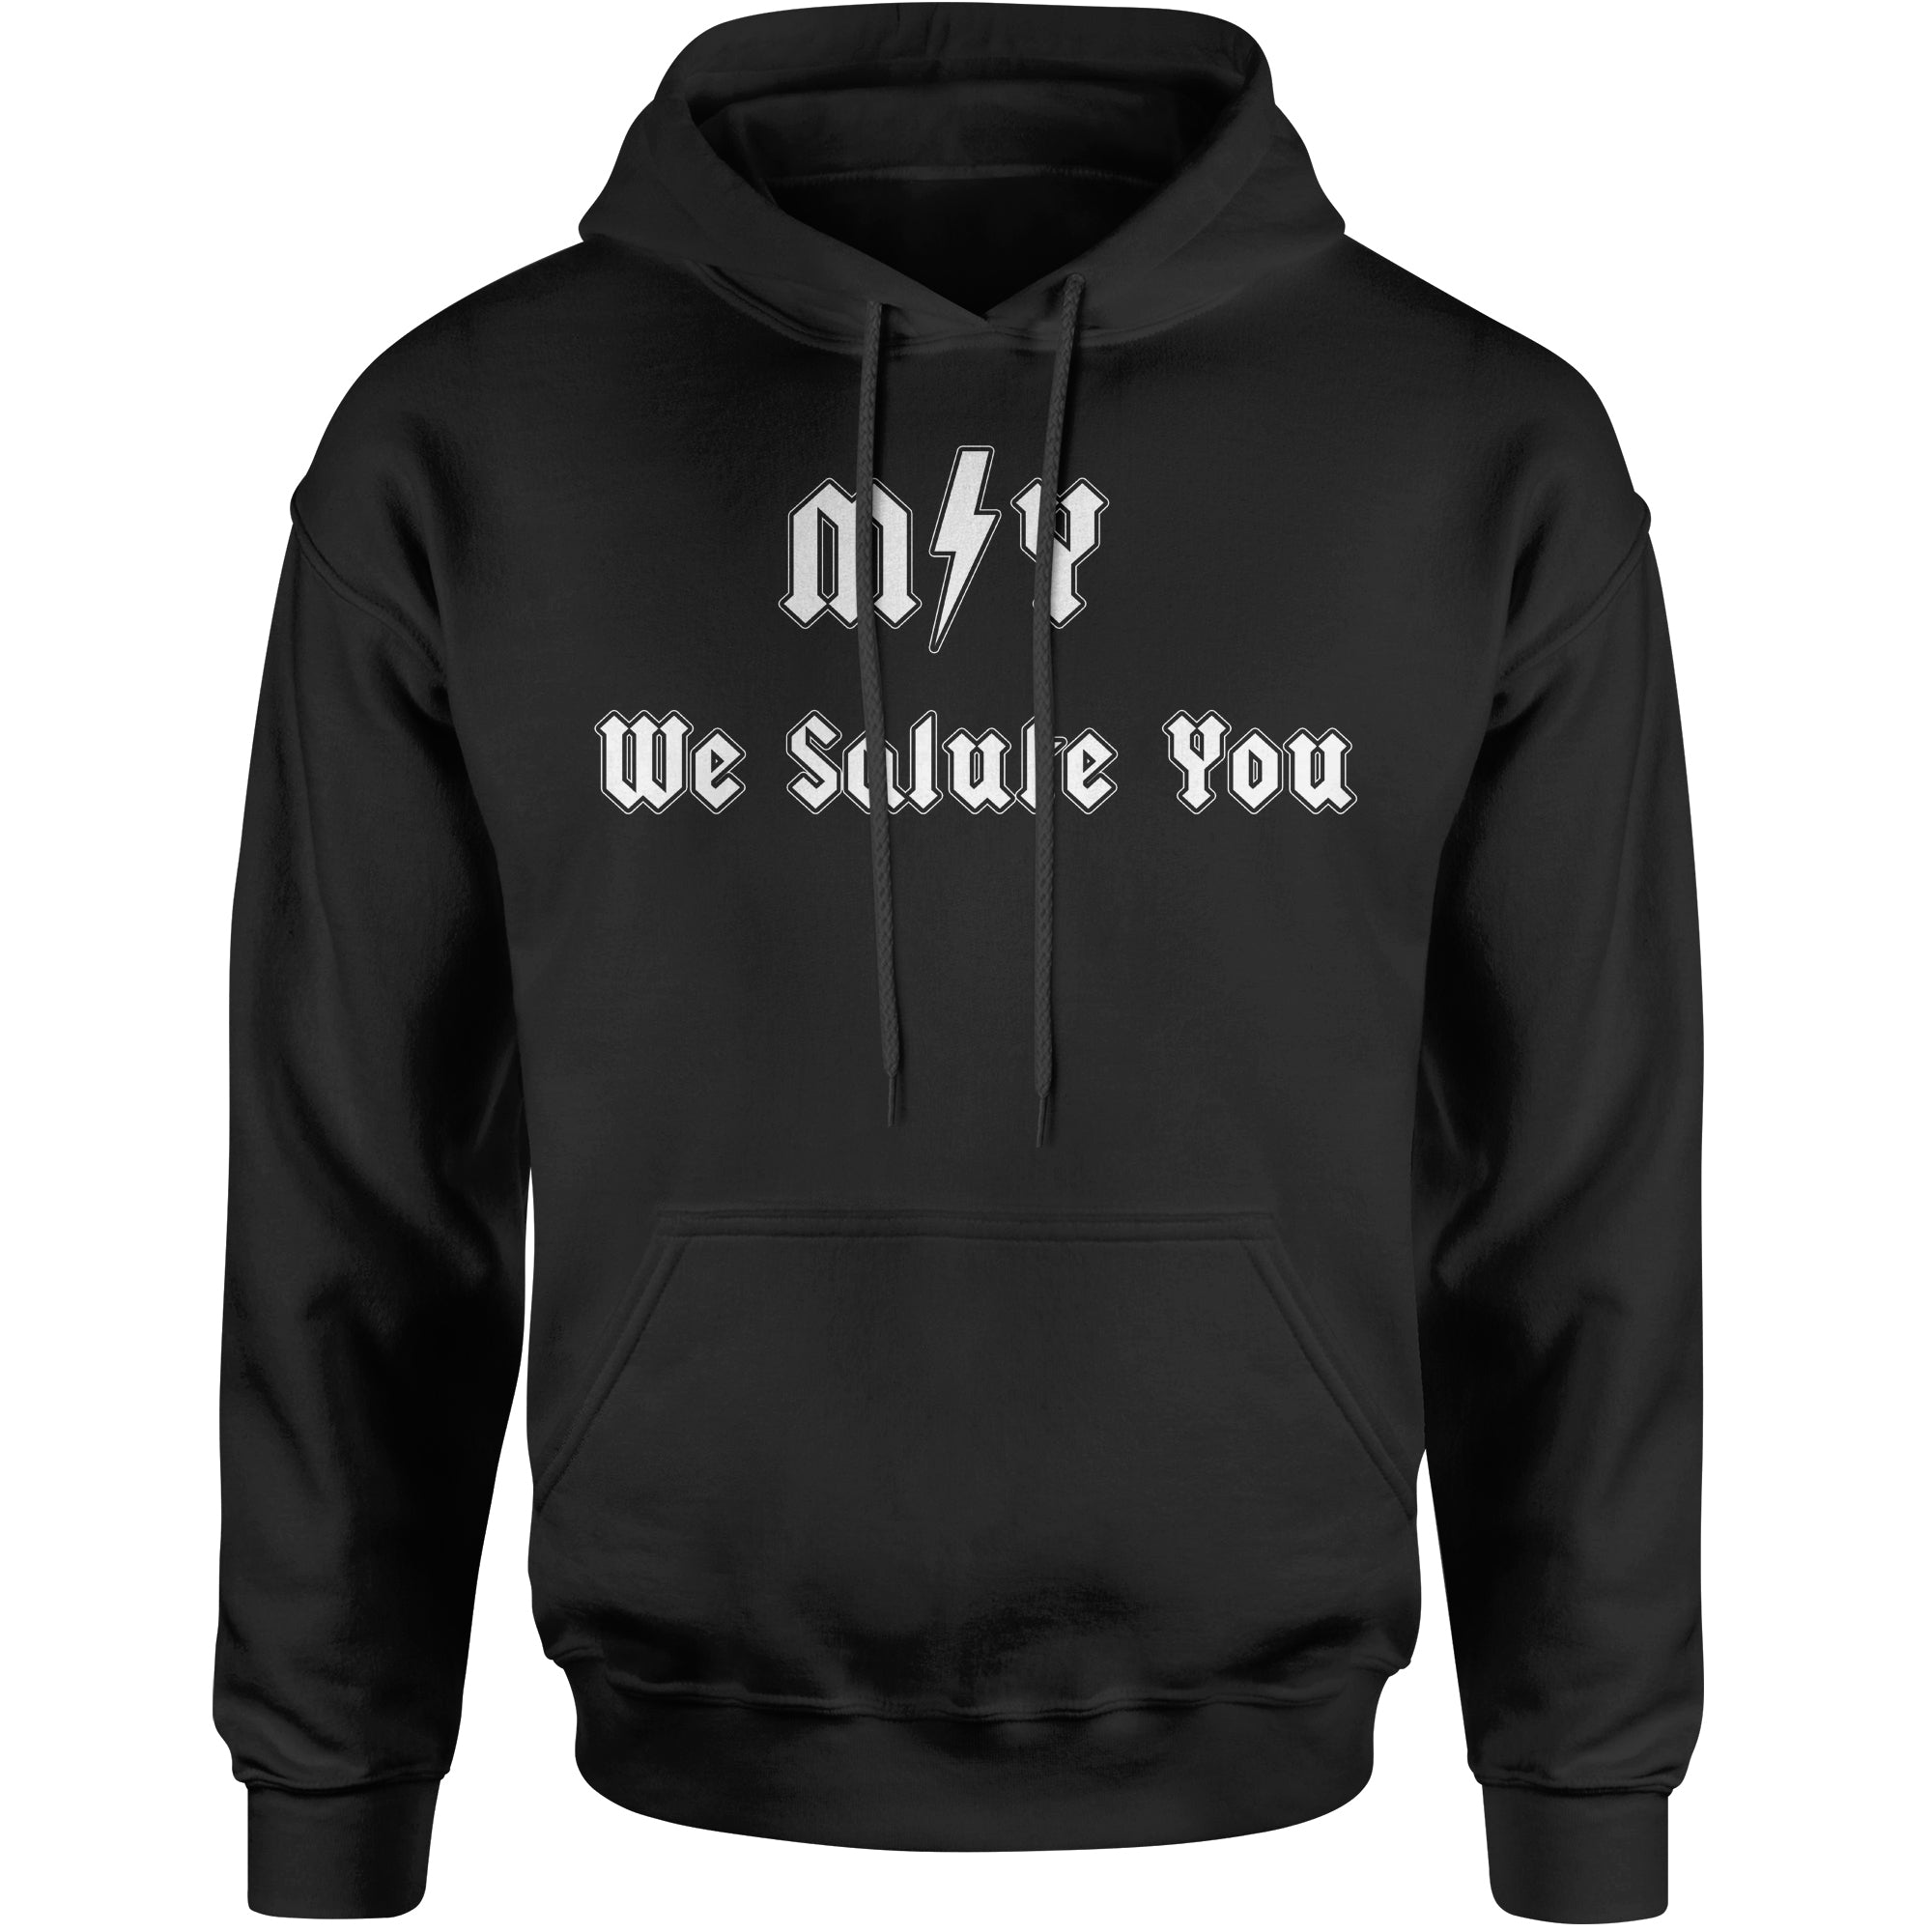 RIP Malcolm, Tribute to the rock legend  Hoodie